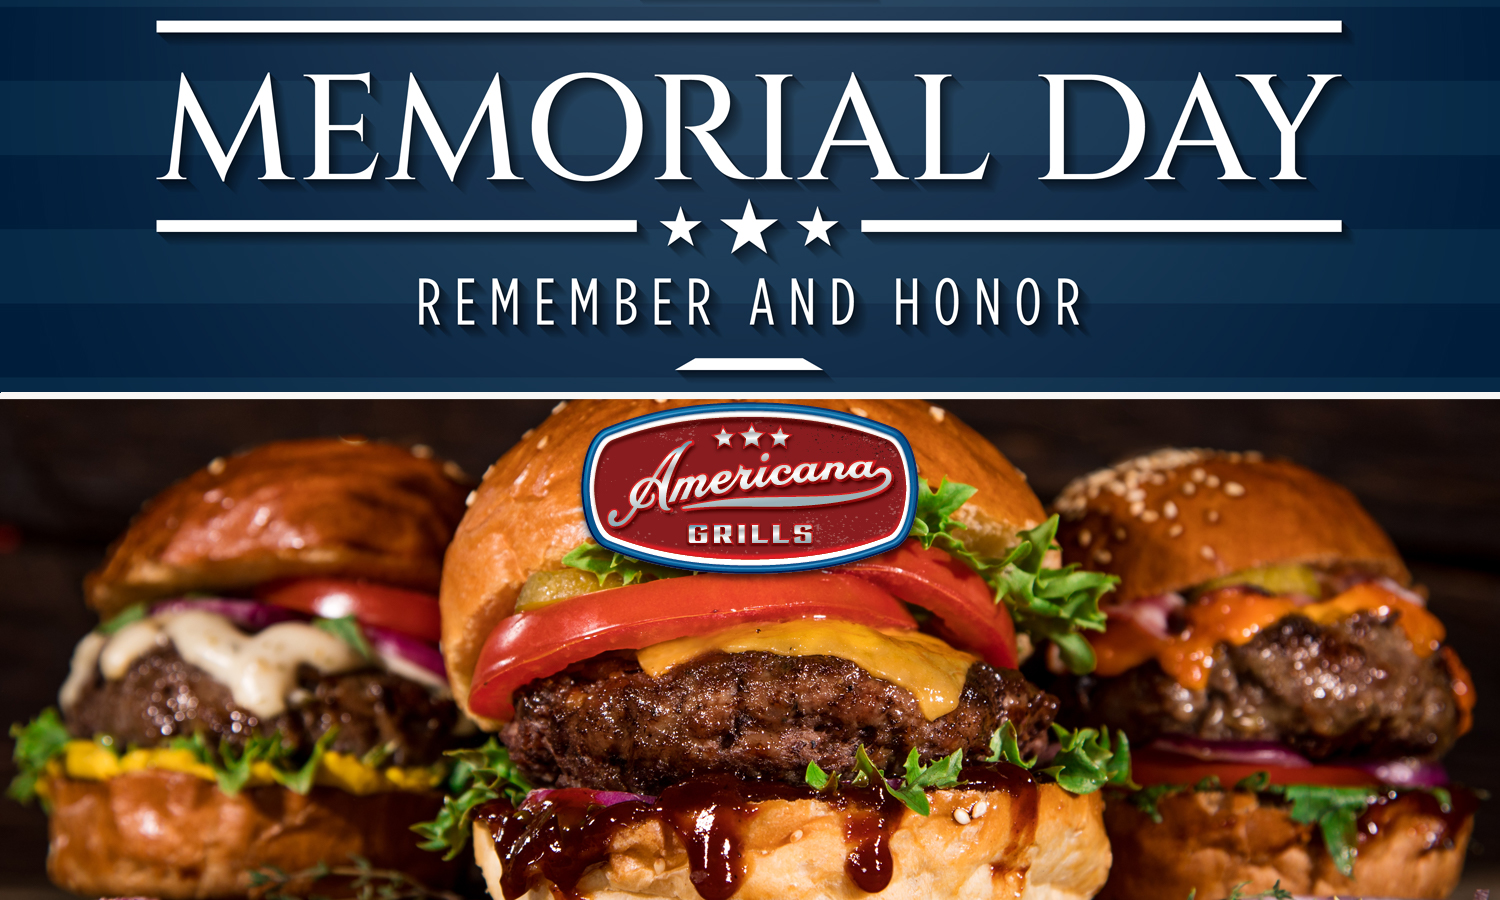 Happy Memorial Day From Americana Grills! MECO